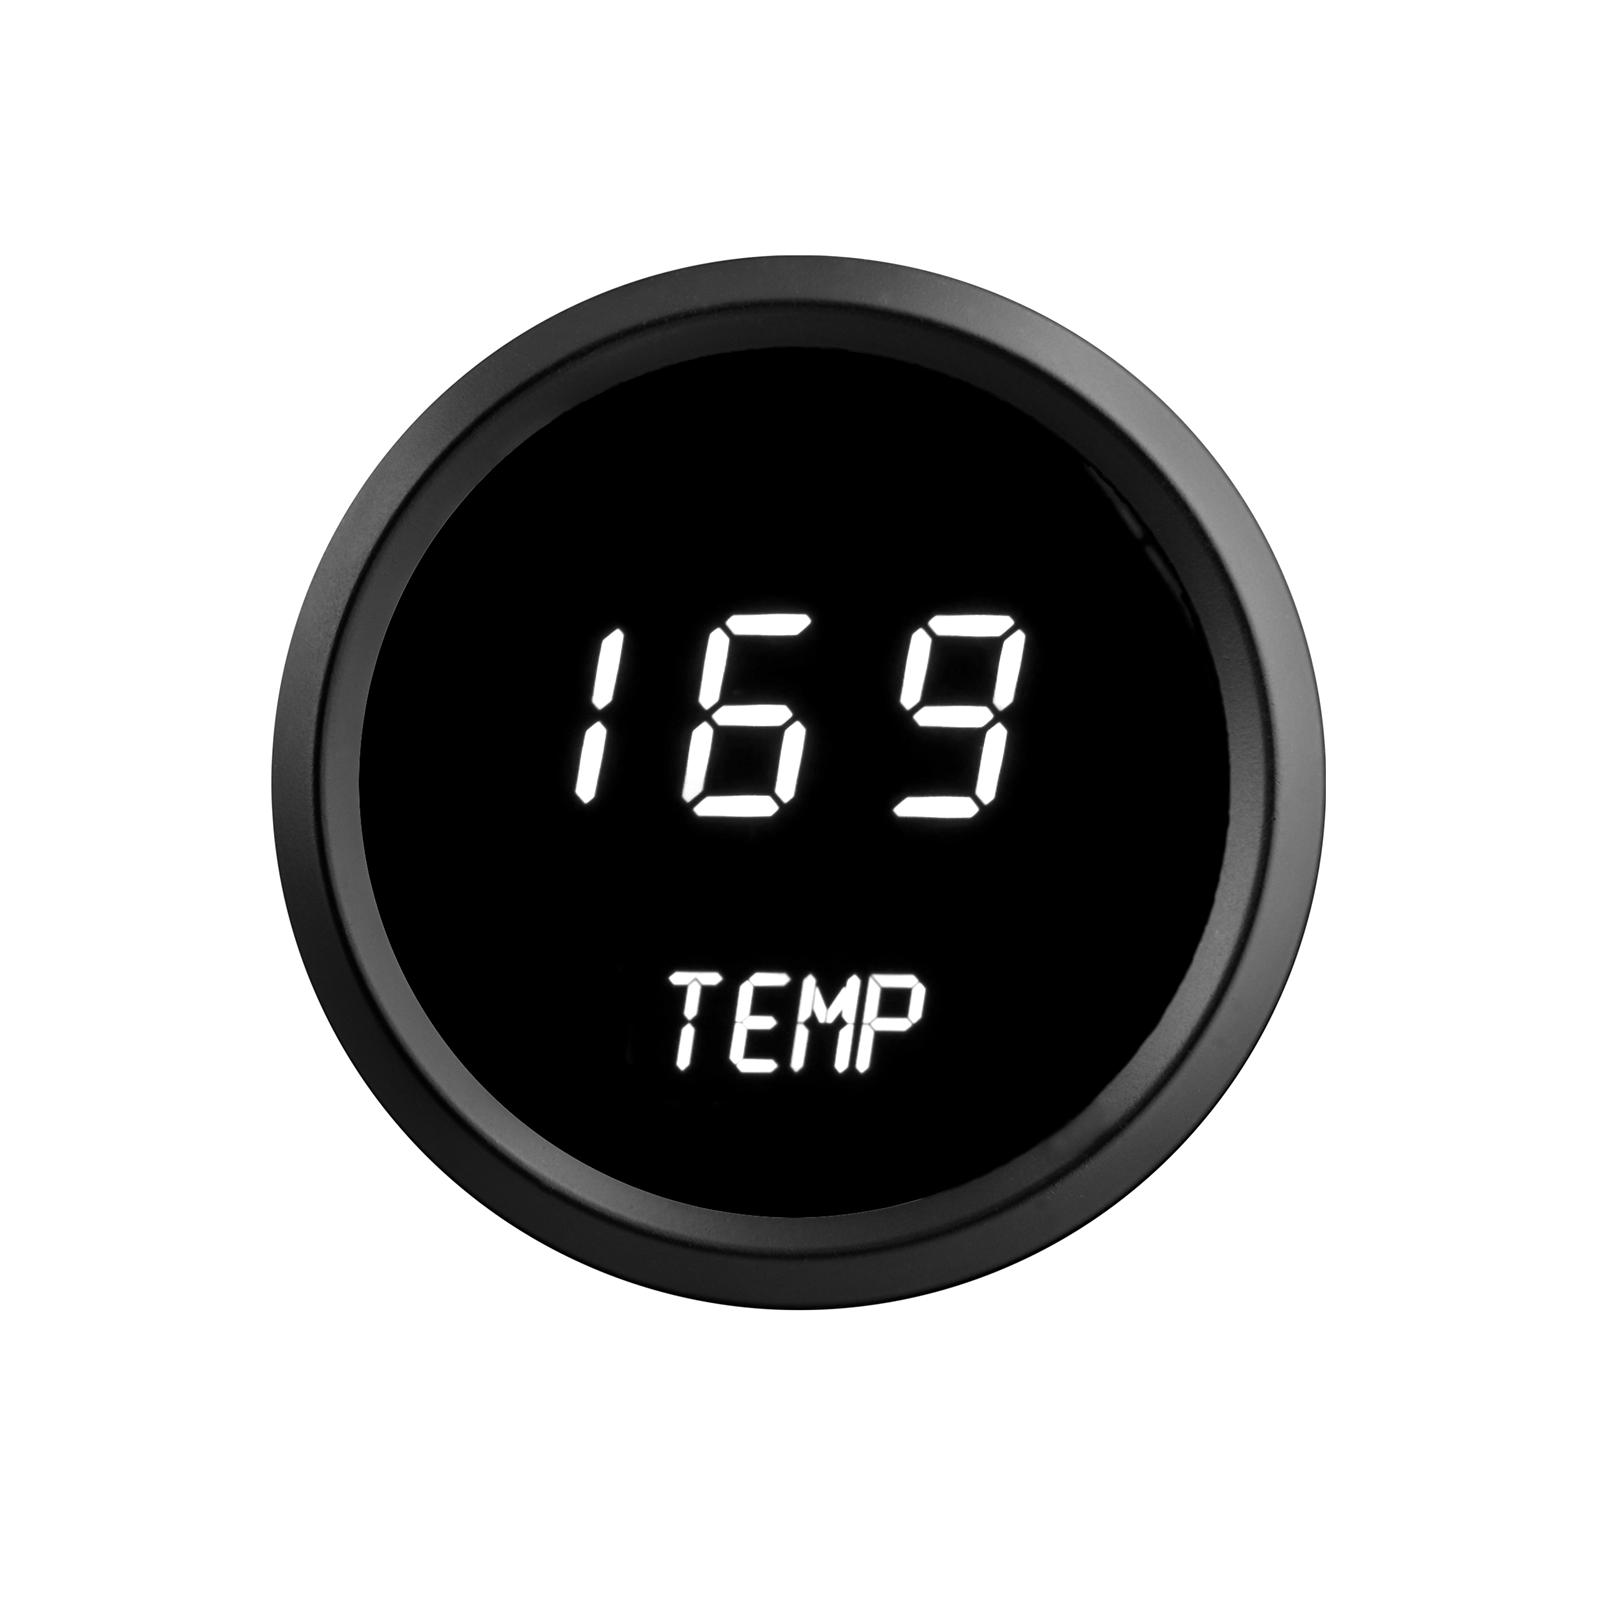 All About Digital Temperature Gauges